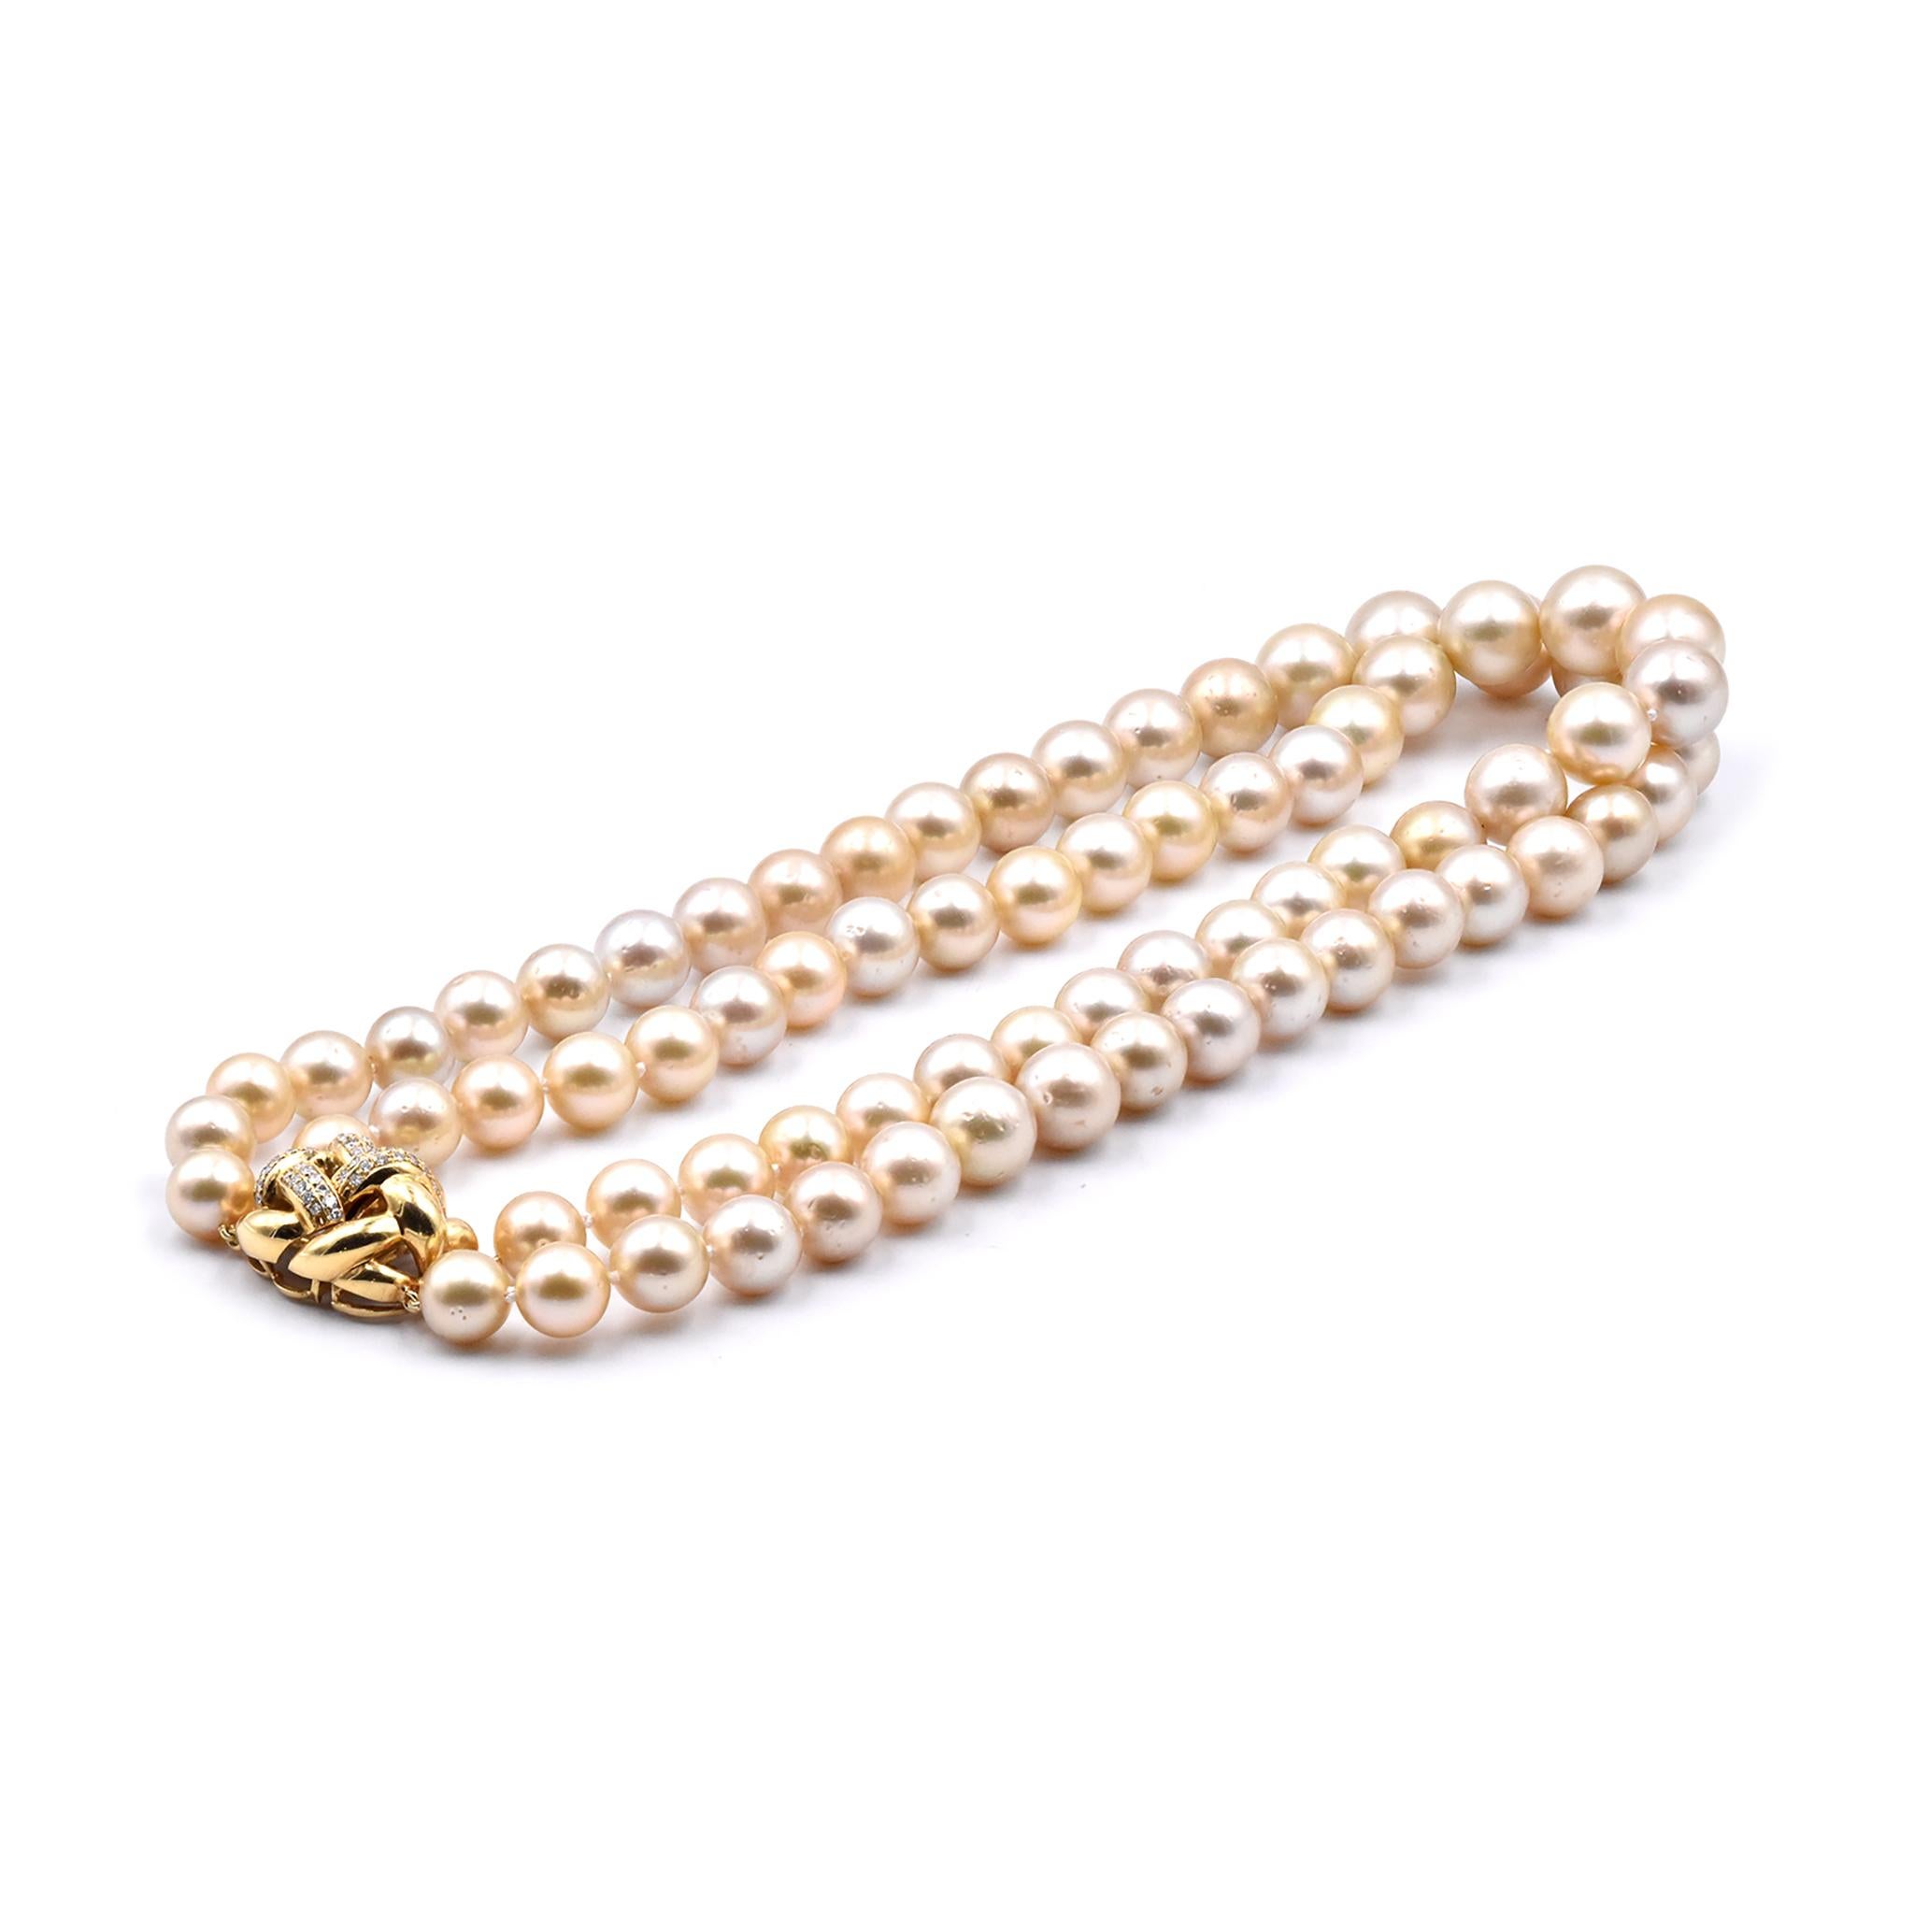 Uncut Golden South Sea Double Strand Pearl Necklace with 18 Karat Yellow Gold Diamond